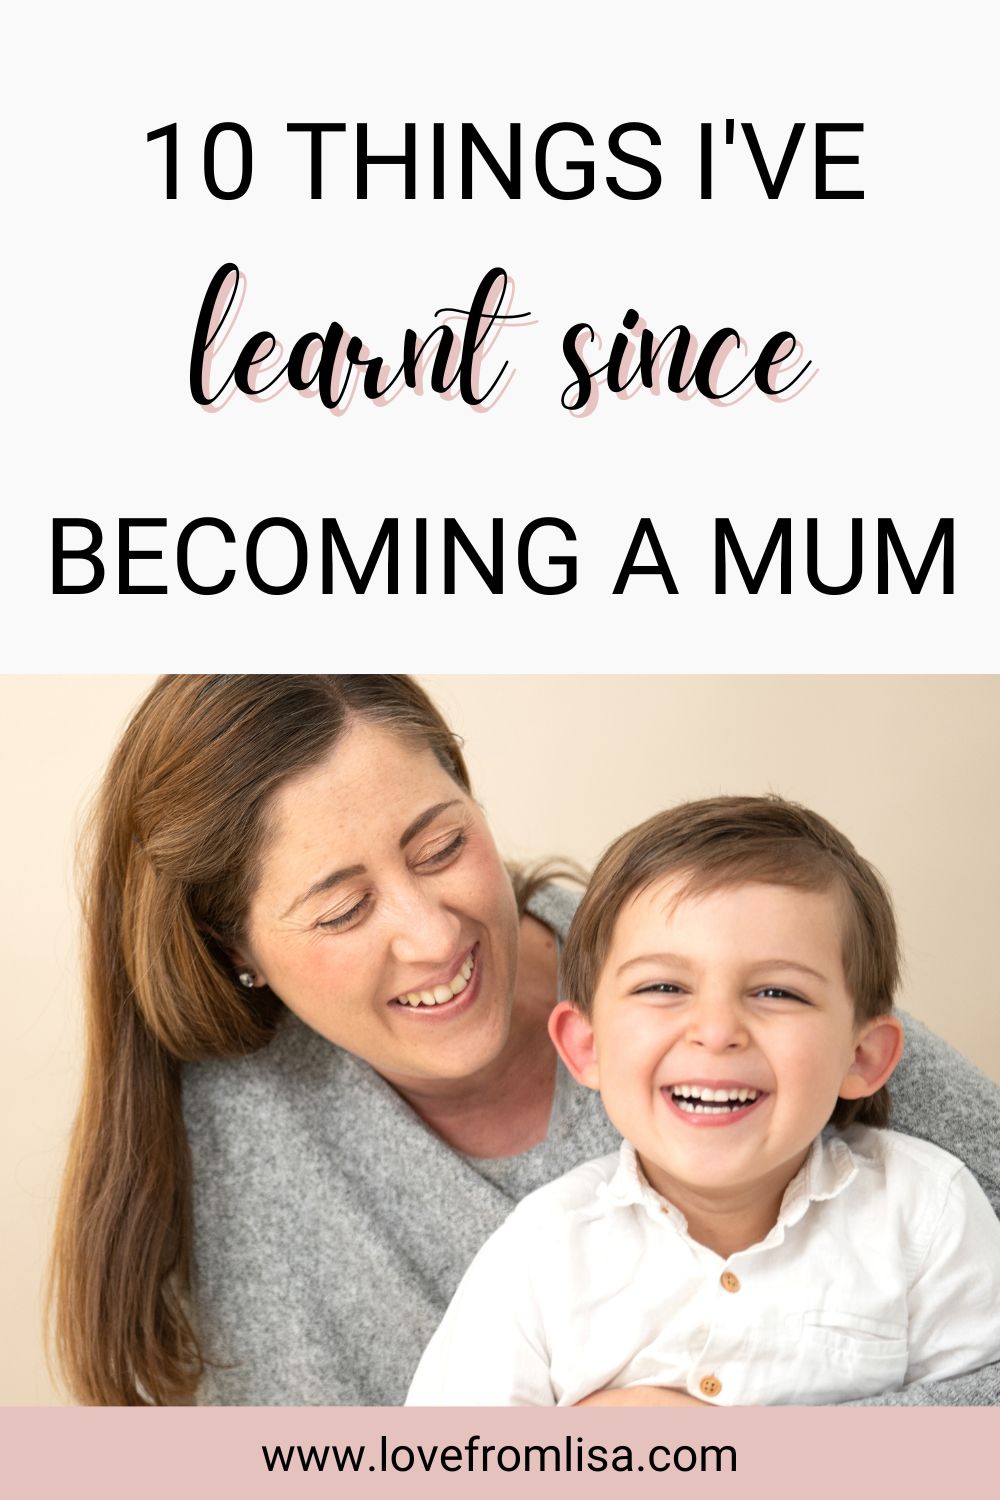 Here are 10 things I’ve learnt since becoming a mum, things that have surprised me, things that I didn’t think I could do, and things I’ve been forced to learn.